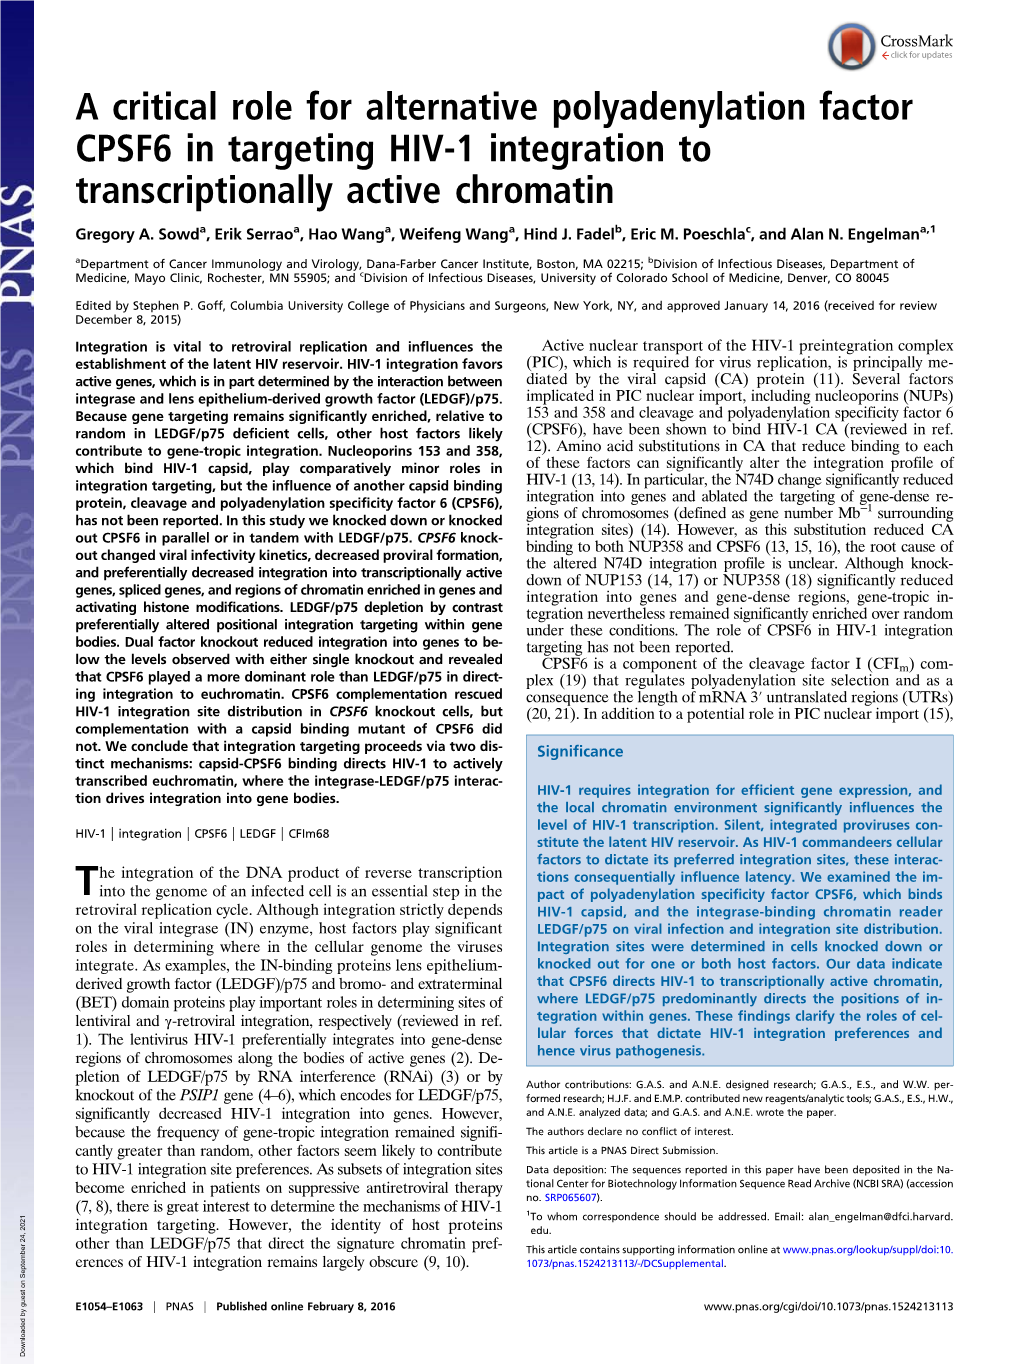 A Critical Role for Alternative Polyadenylation Factor CPSF6 in Targeting HIV-1 Integration to Transcriptionally Active Chromatin